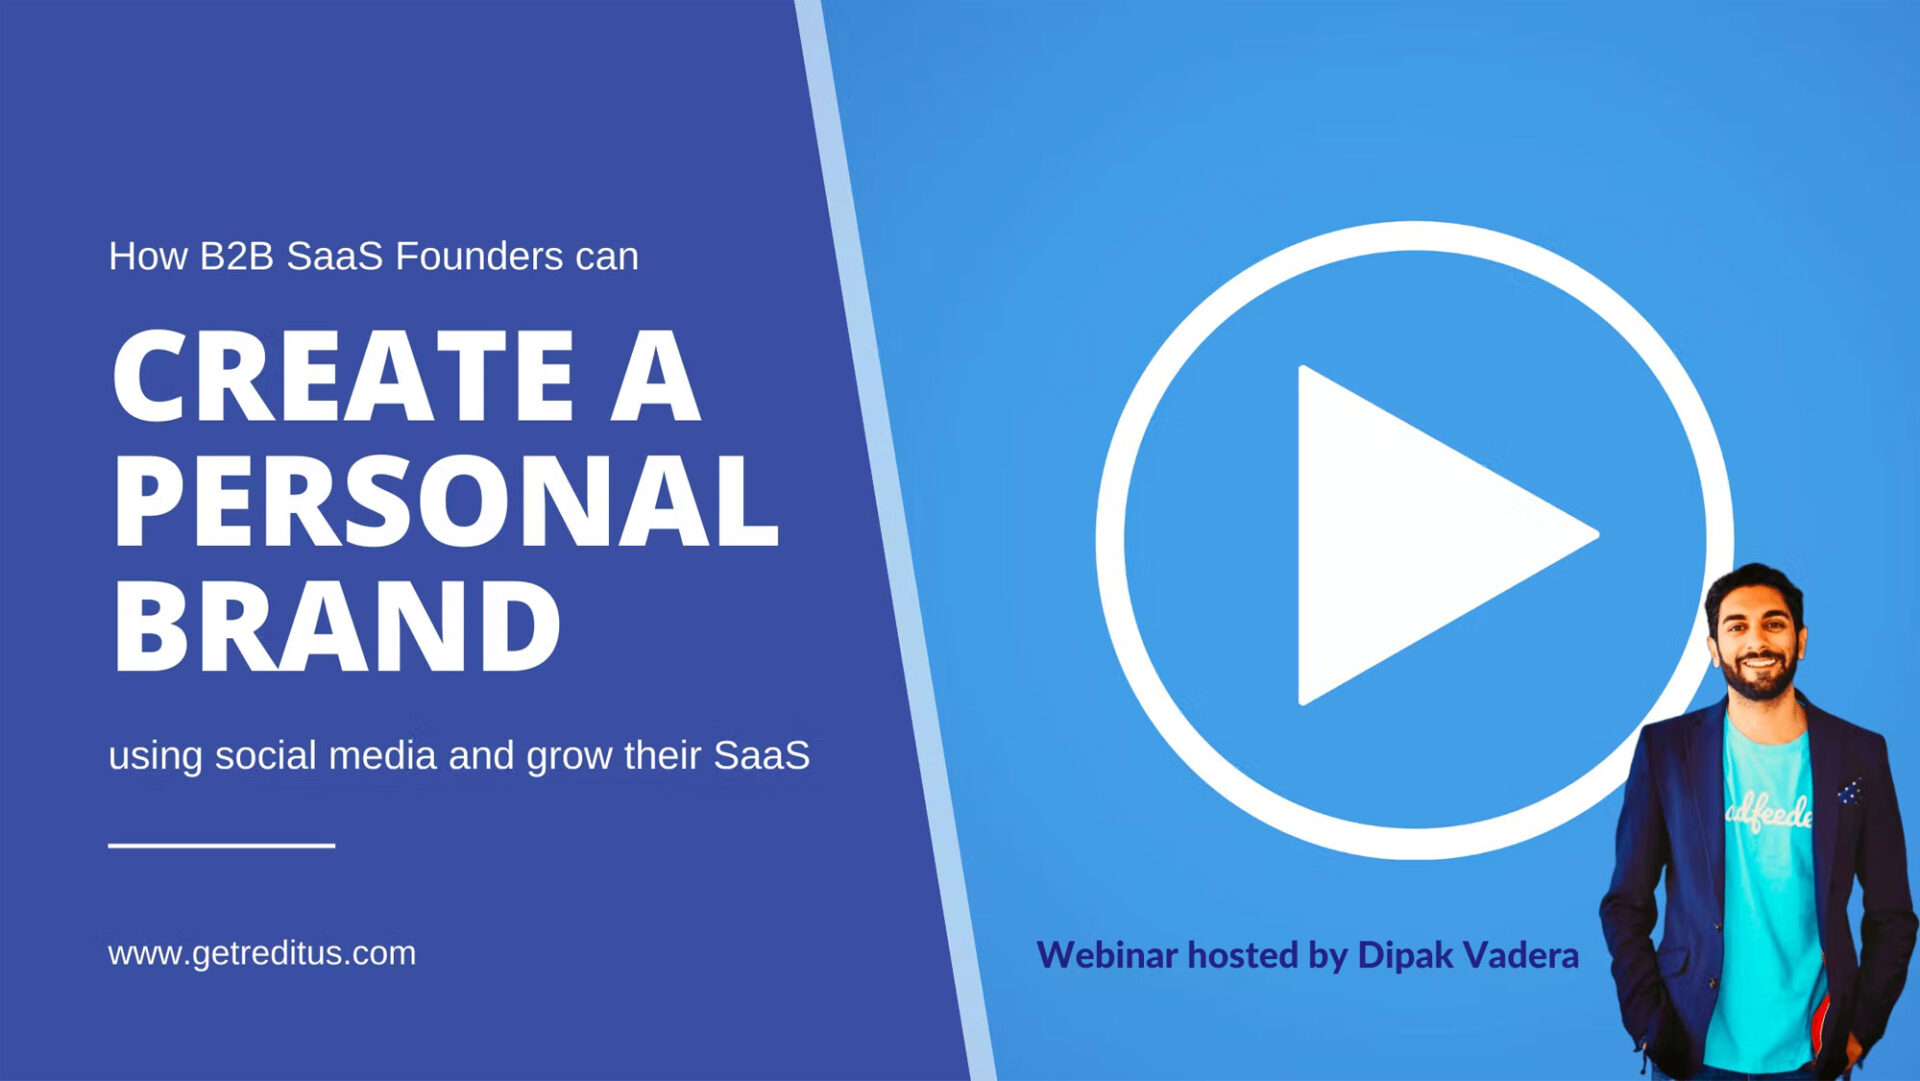 How B2B SaaS founders can use social media to create a personal brand and grow their SaaS.